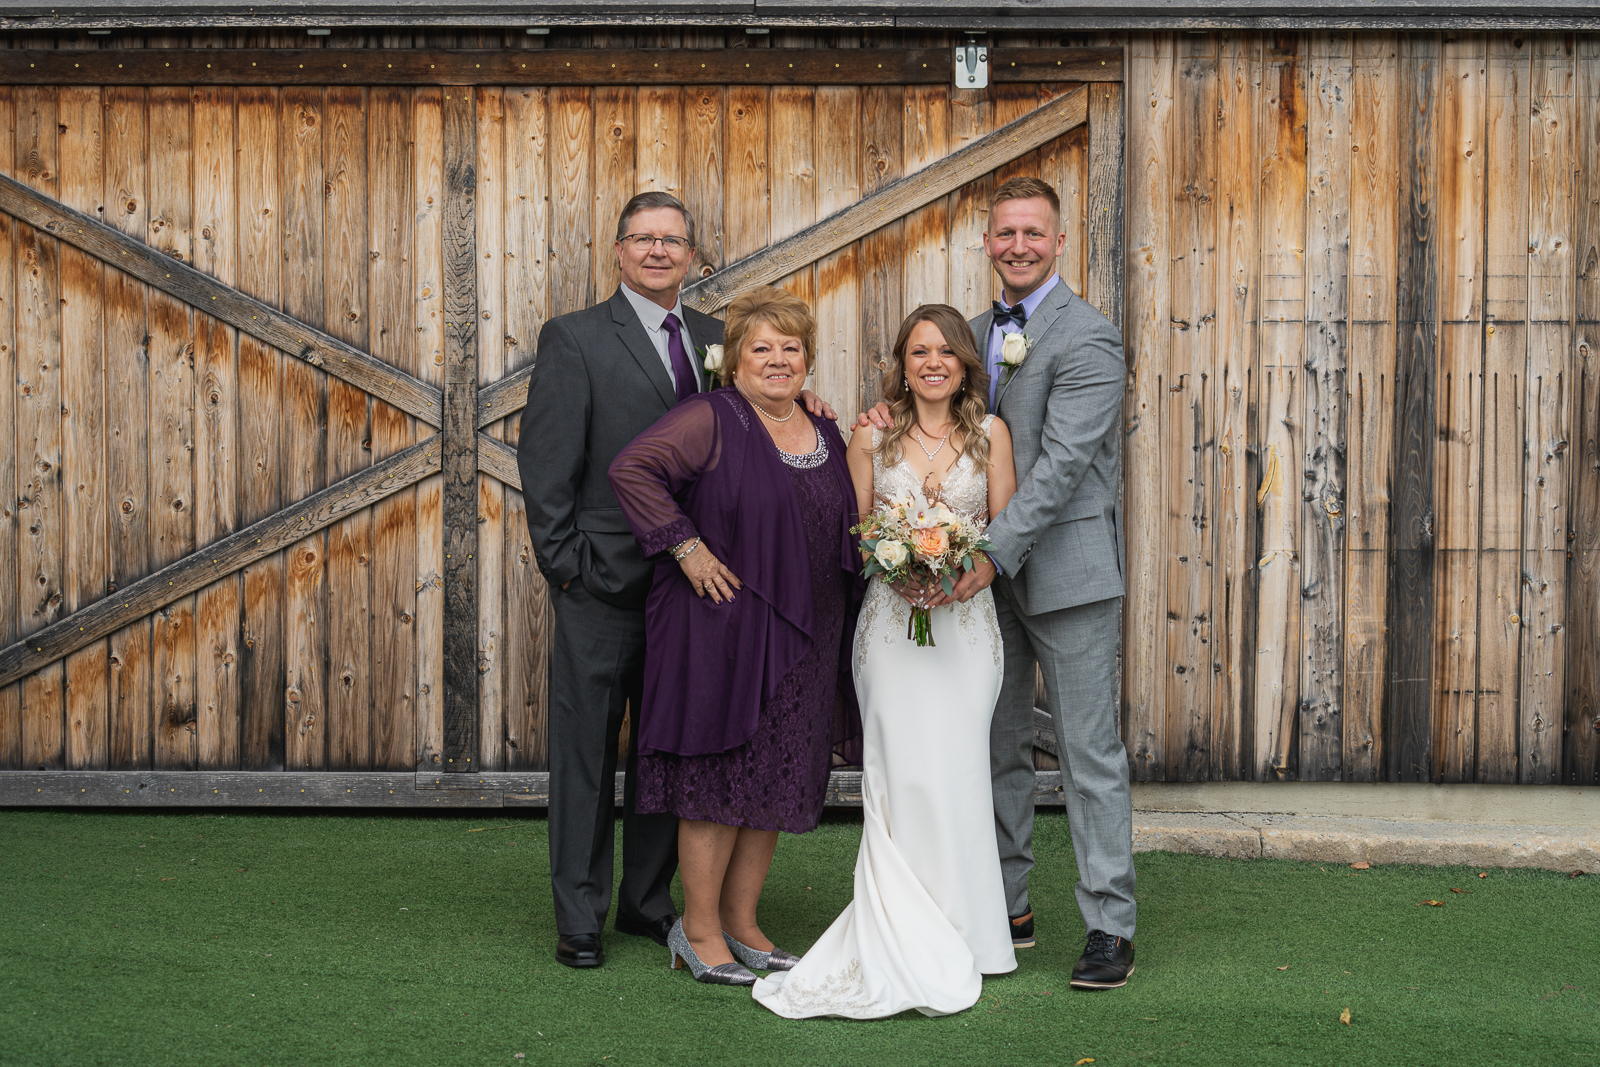 Bride and groom with bride's parents, mom and dad, family portrait, wedding photo, fall wedding, rustic outdoor wedding ceremony at White Birch Barn